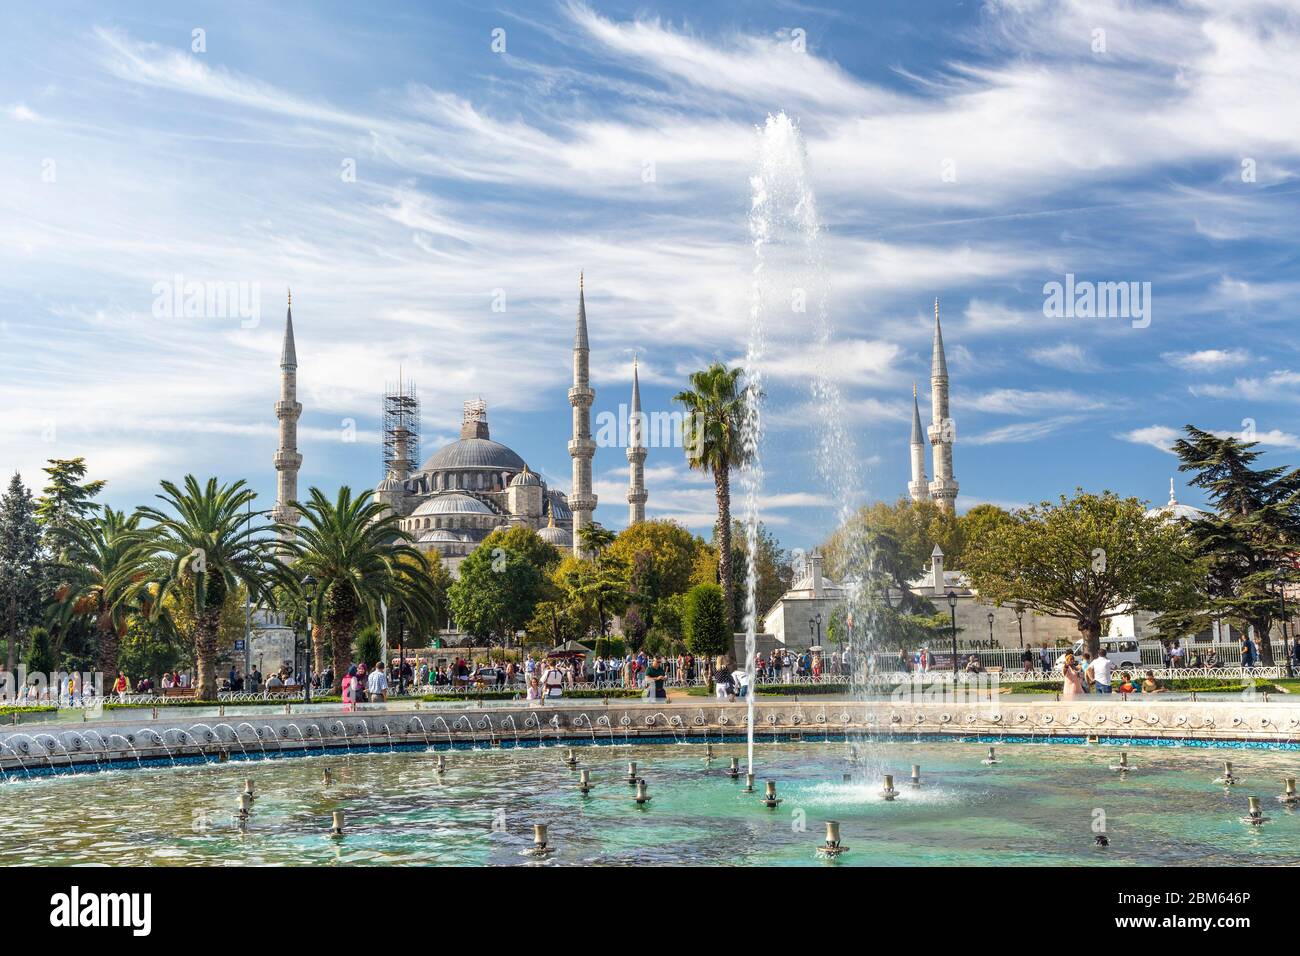 Sultan-Ahmed-Moschee, Istanbul Stock Photo